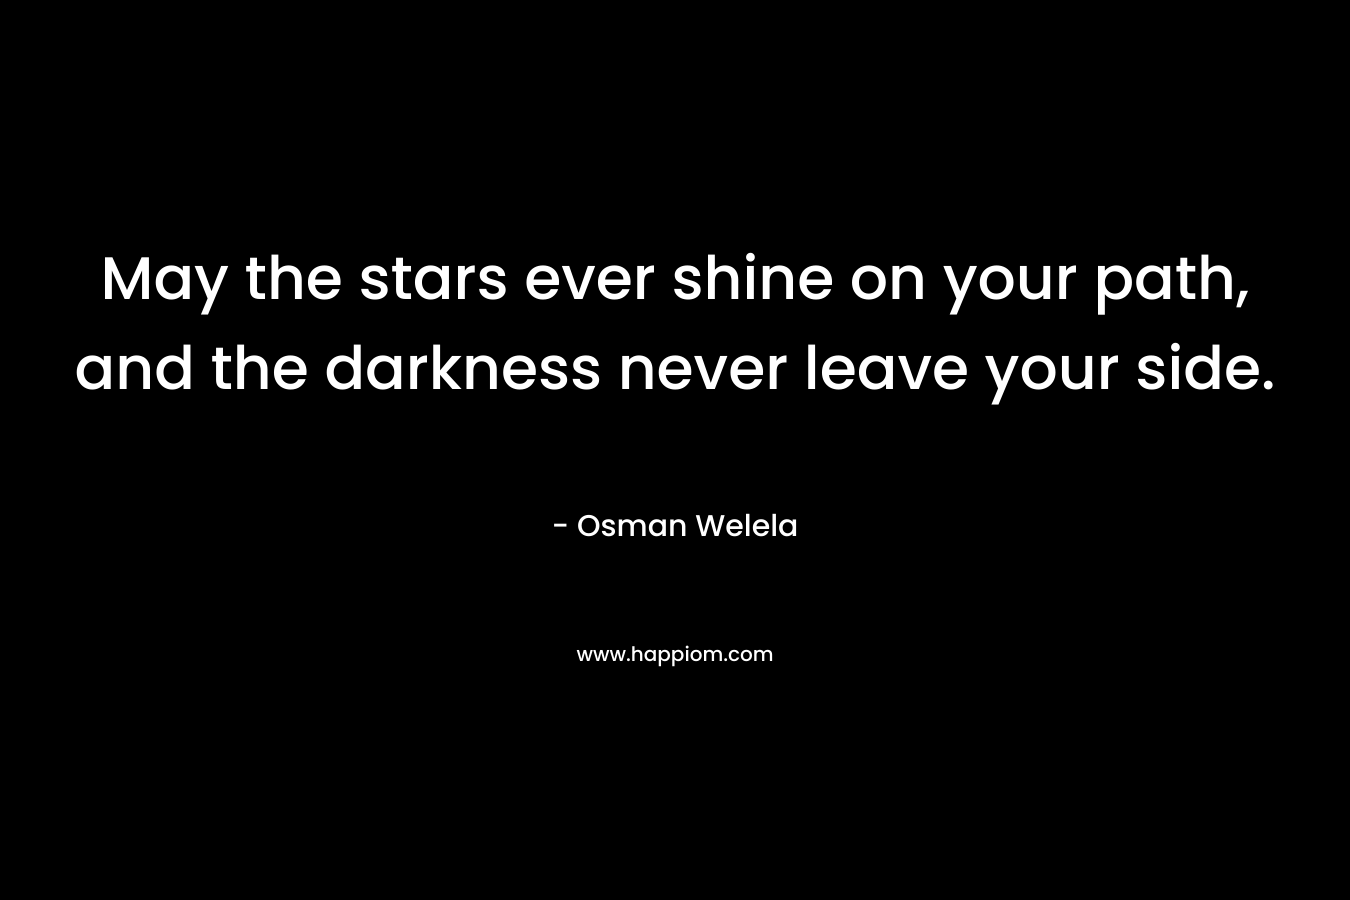 May the stars ever shine on your path, and the darkness never leave your side.